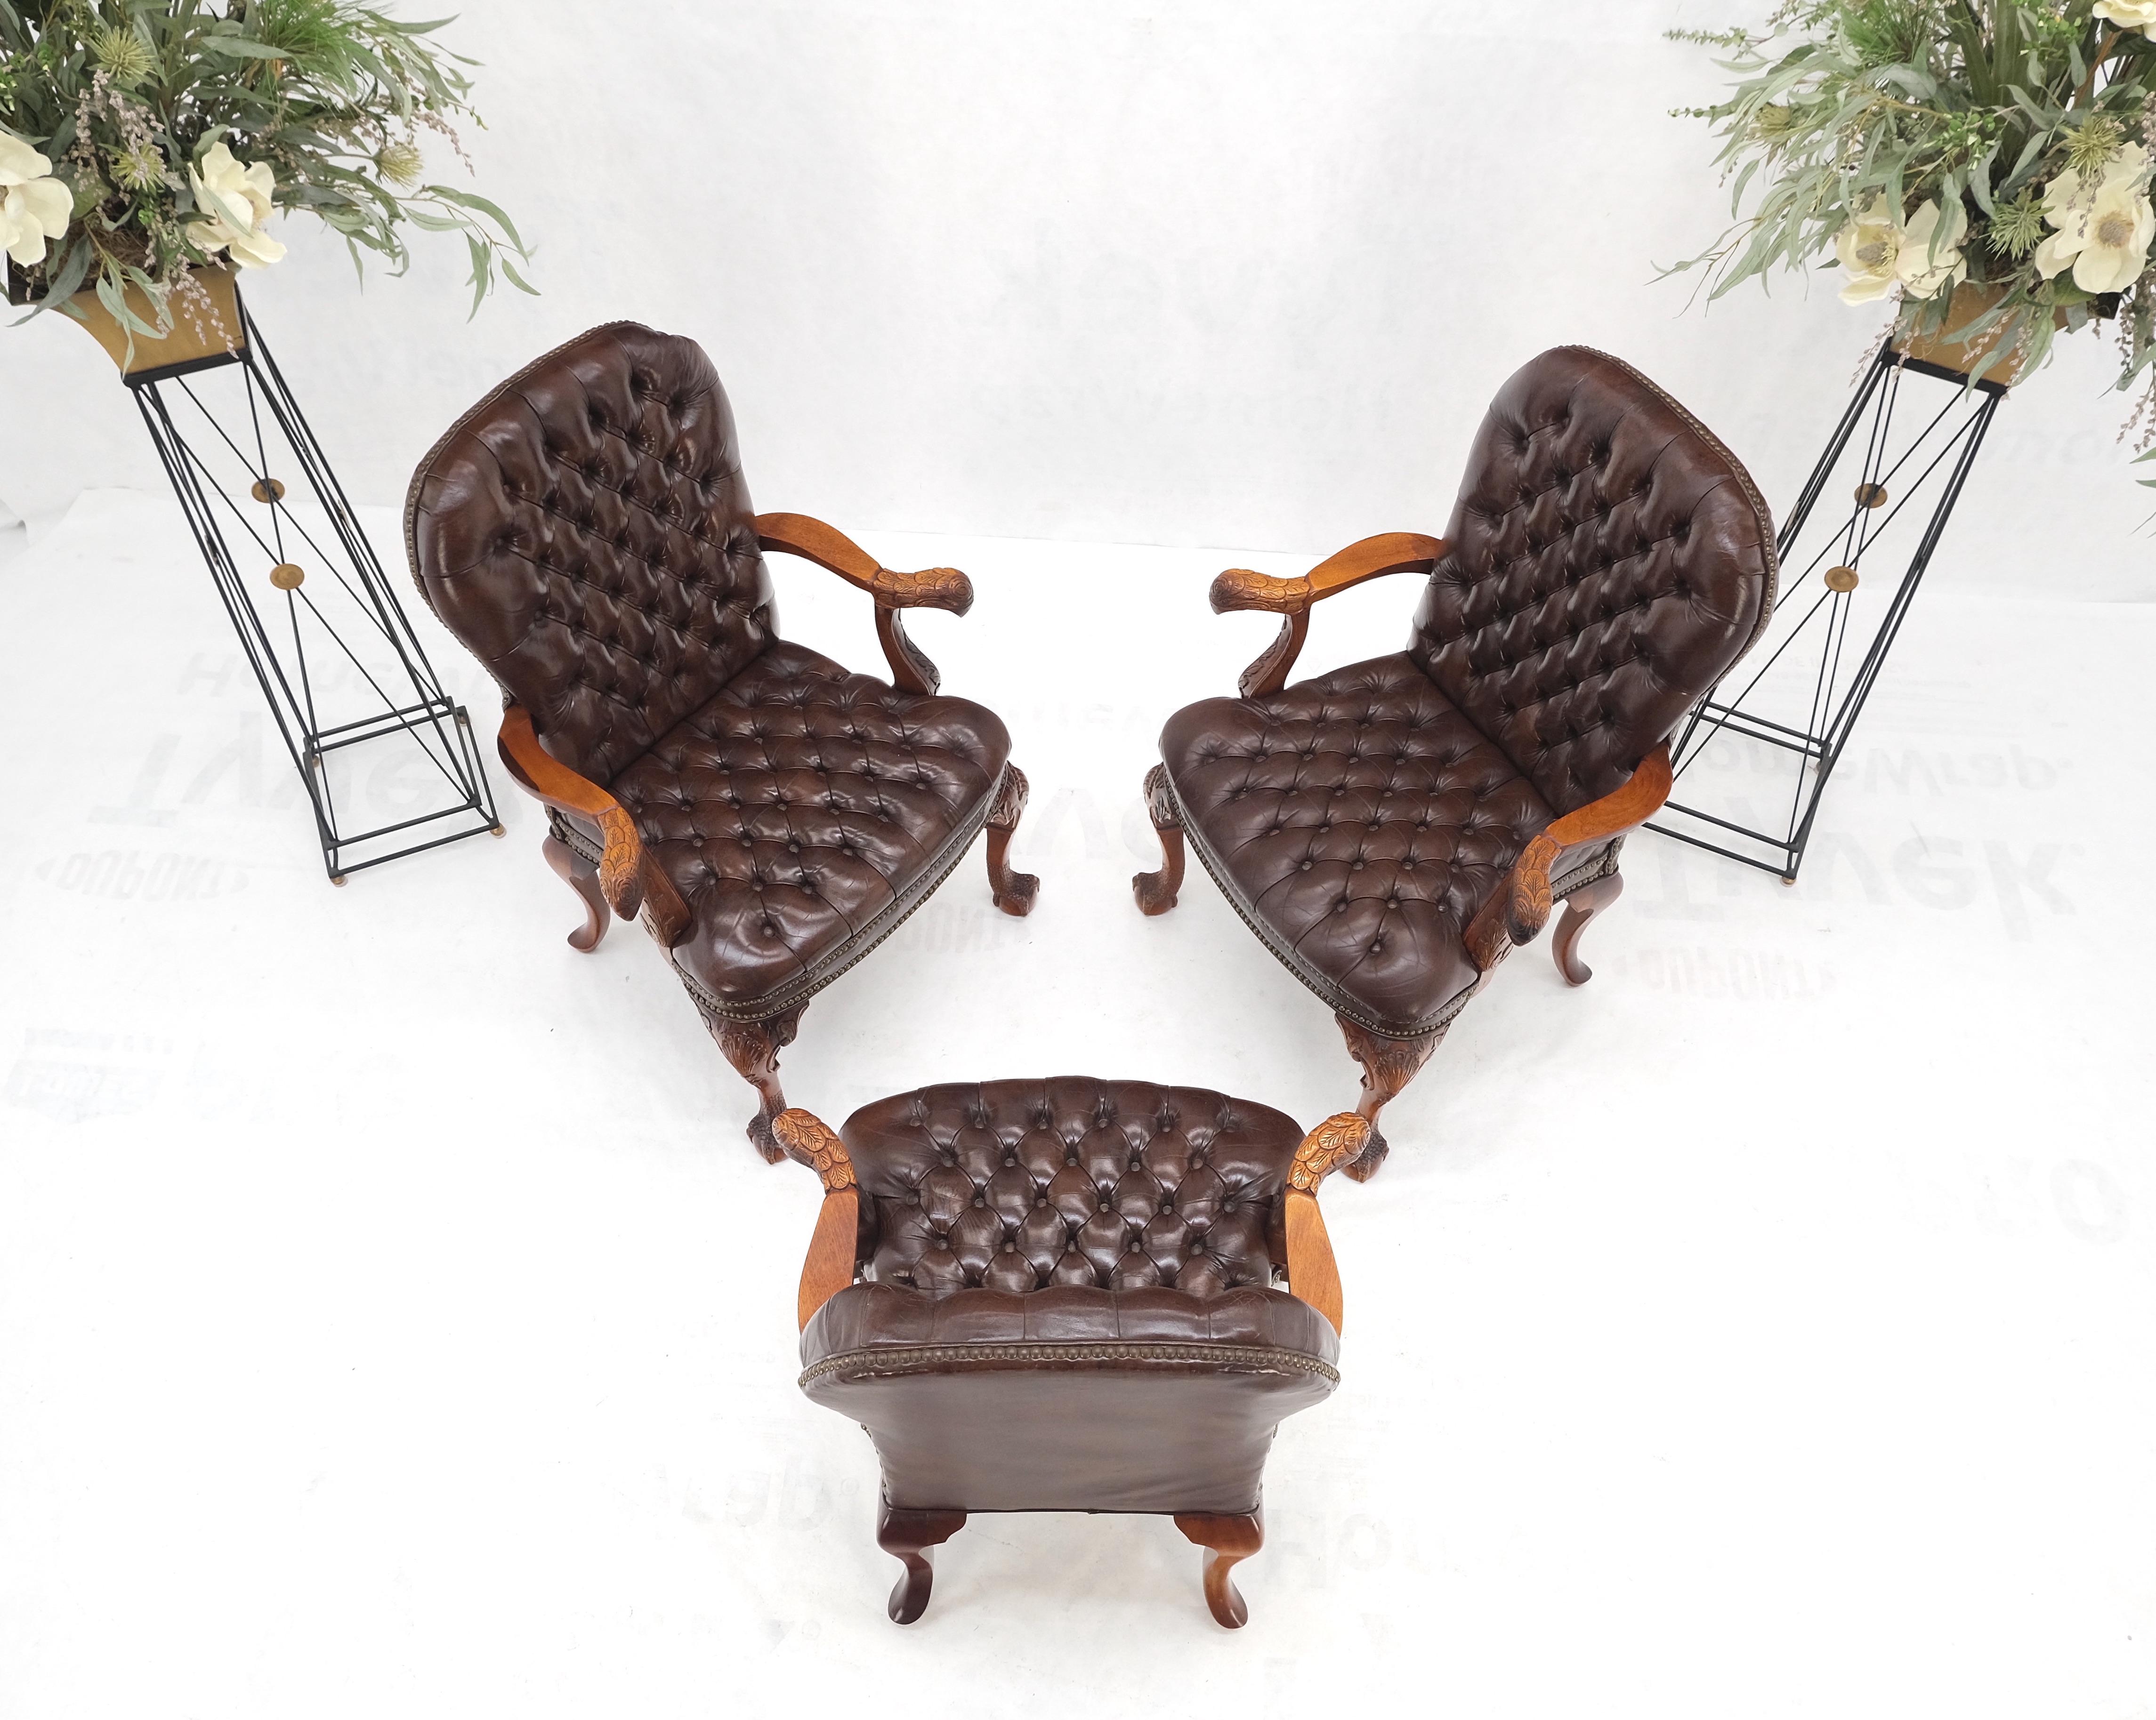 Upholstery Brown Leather Chesterfield Backs & Seat Carved Walnut Armchairs Fireside Chairs For Sale